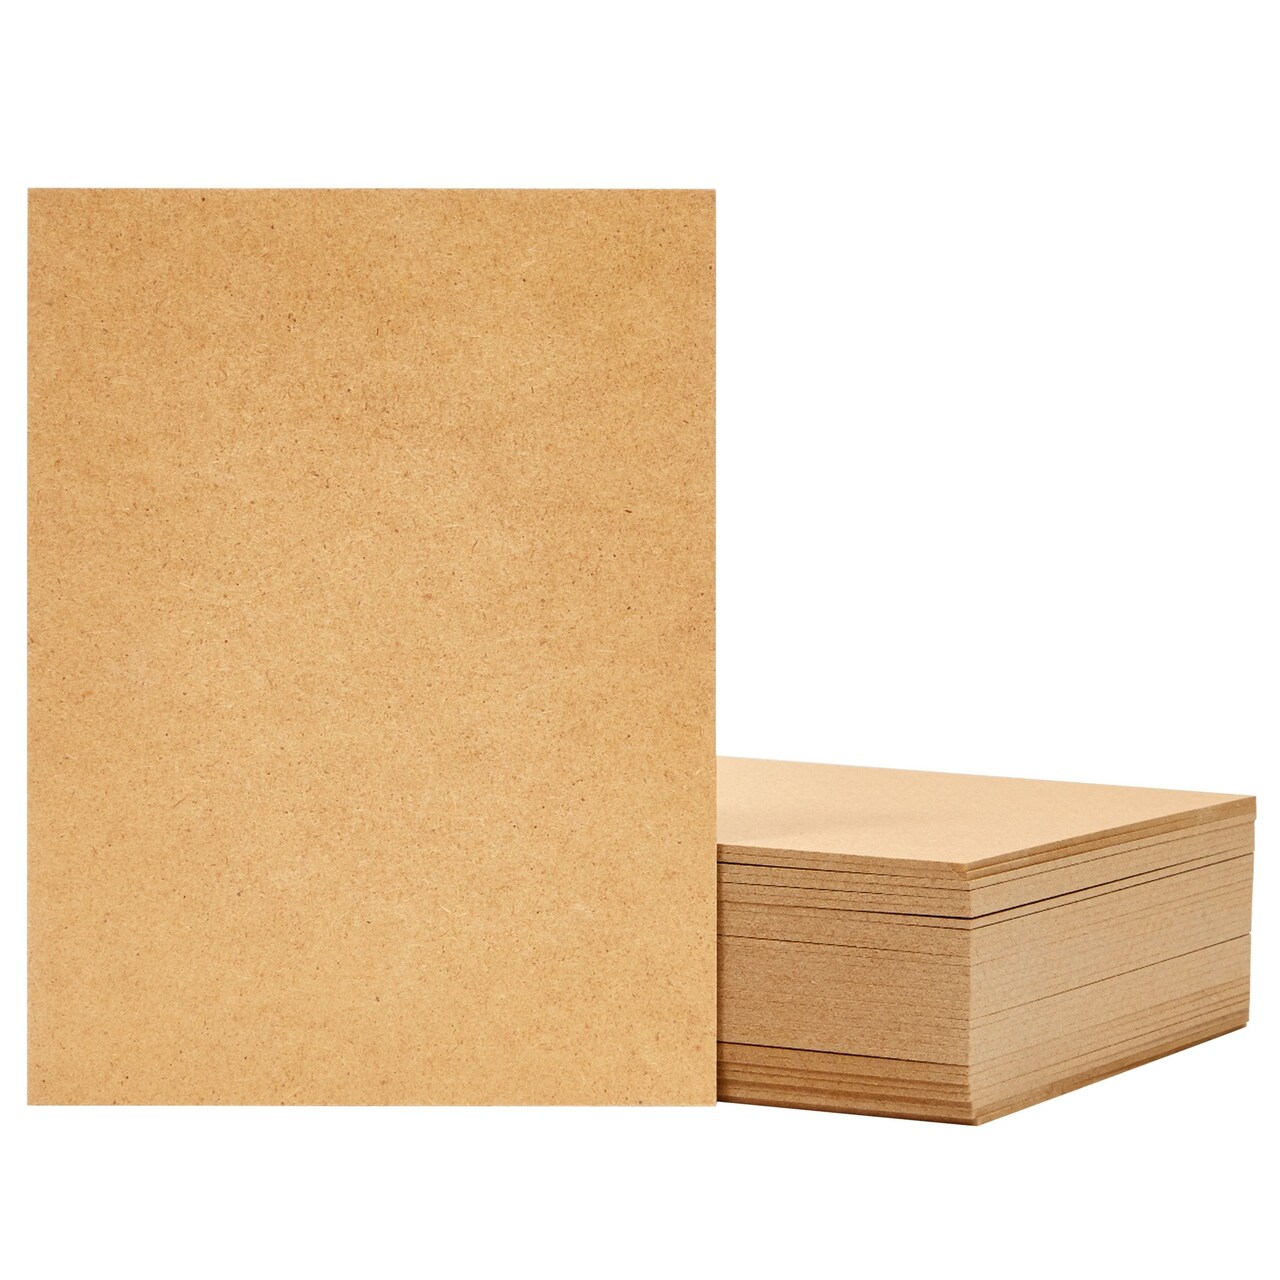 30 Sheets Thin MDF Wood Boards for Crafts, 2mm Medium Density